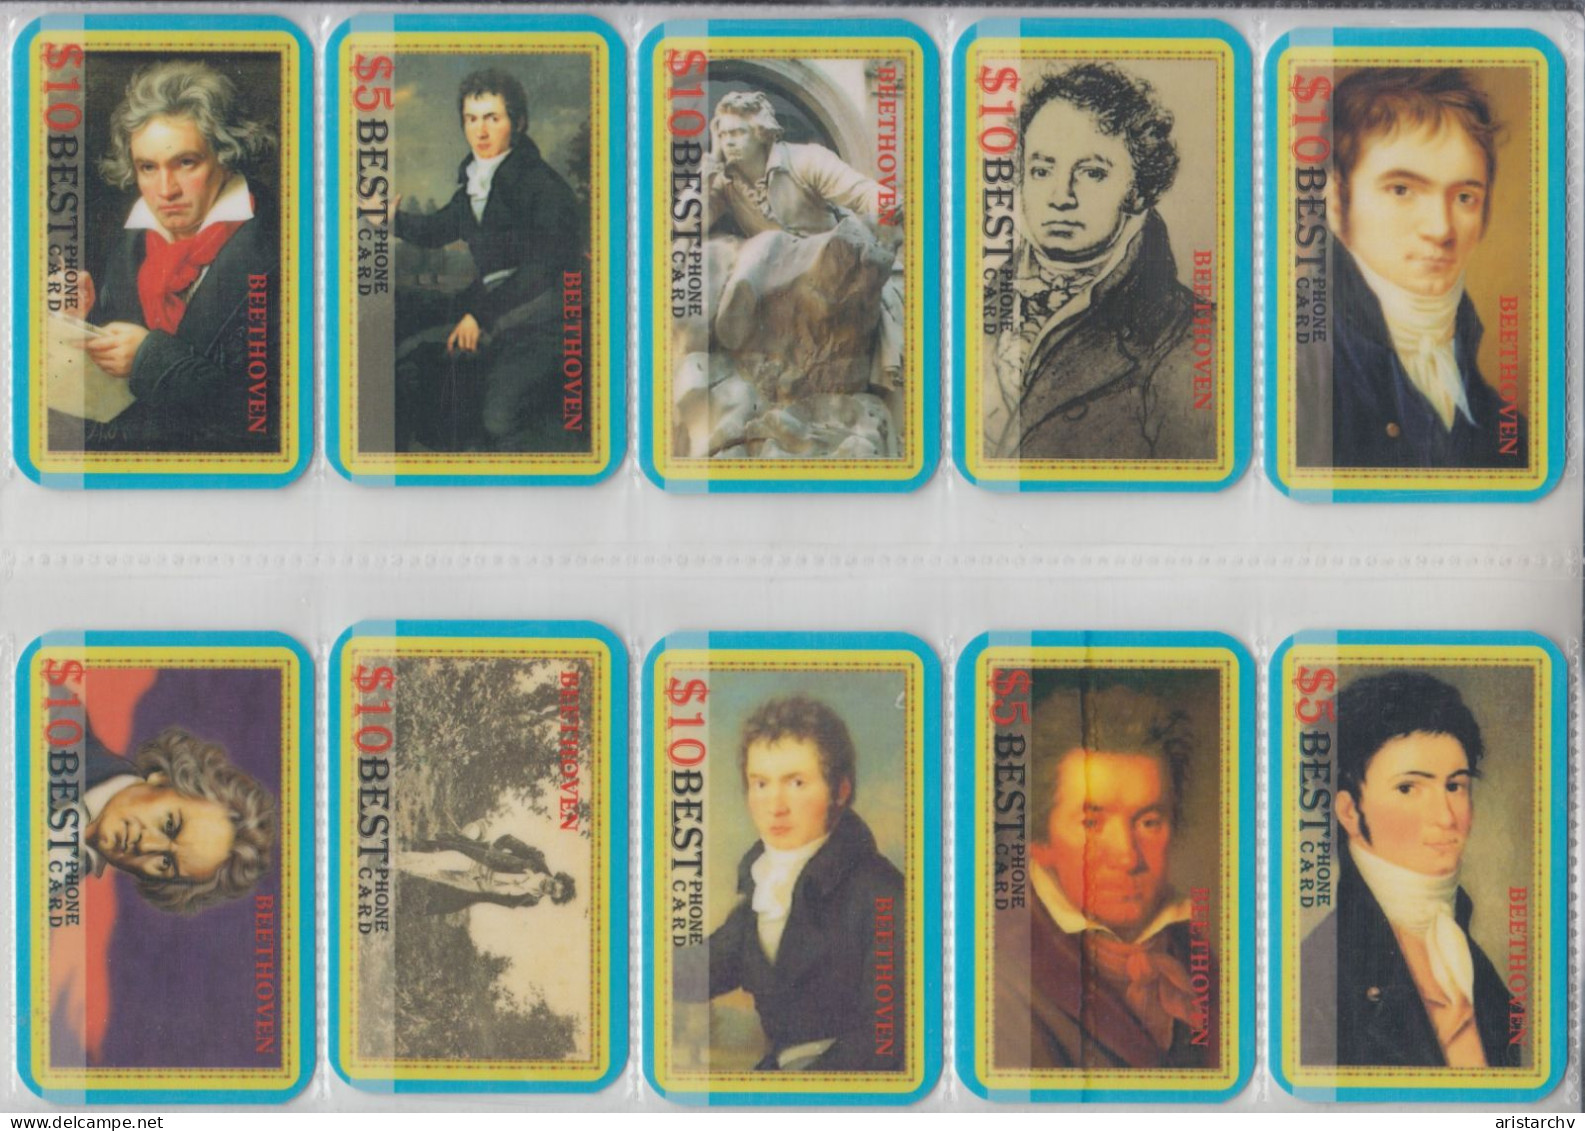 USA CLASSIC MUSIC COMPOSER LUDWIG VAN BEETHOVEN SET OF 10 CARDS - Music